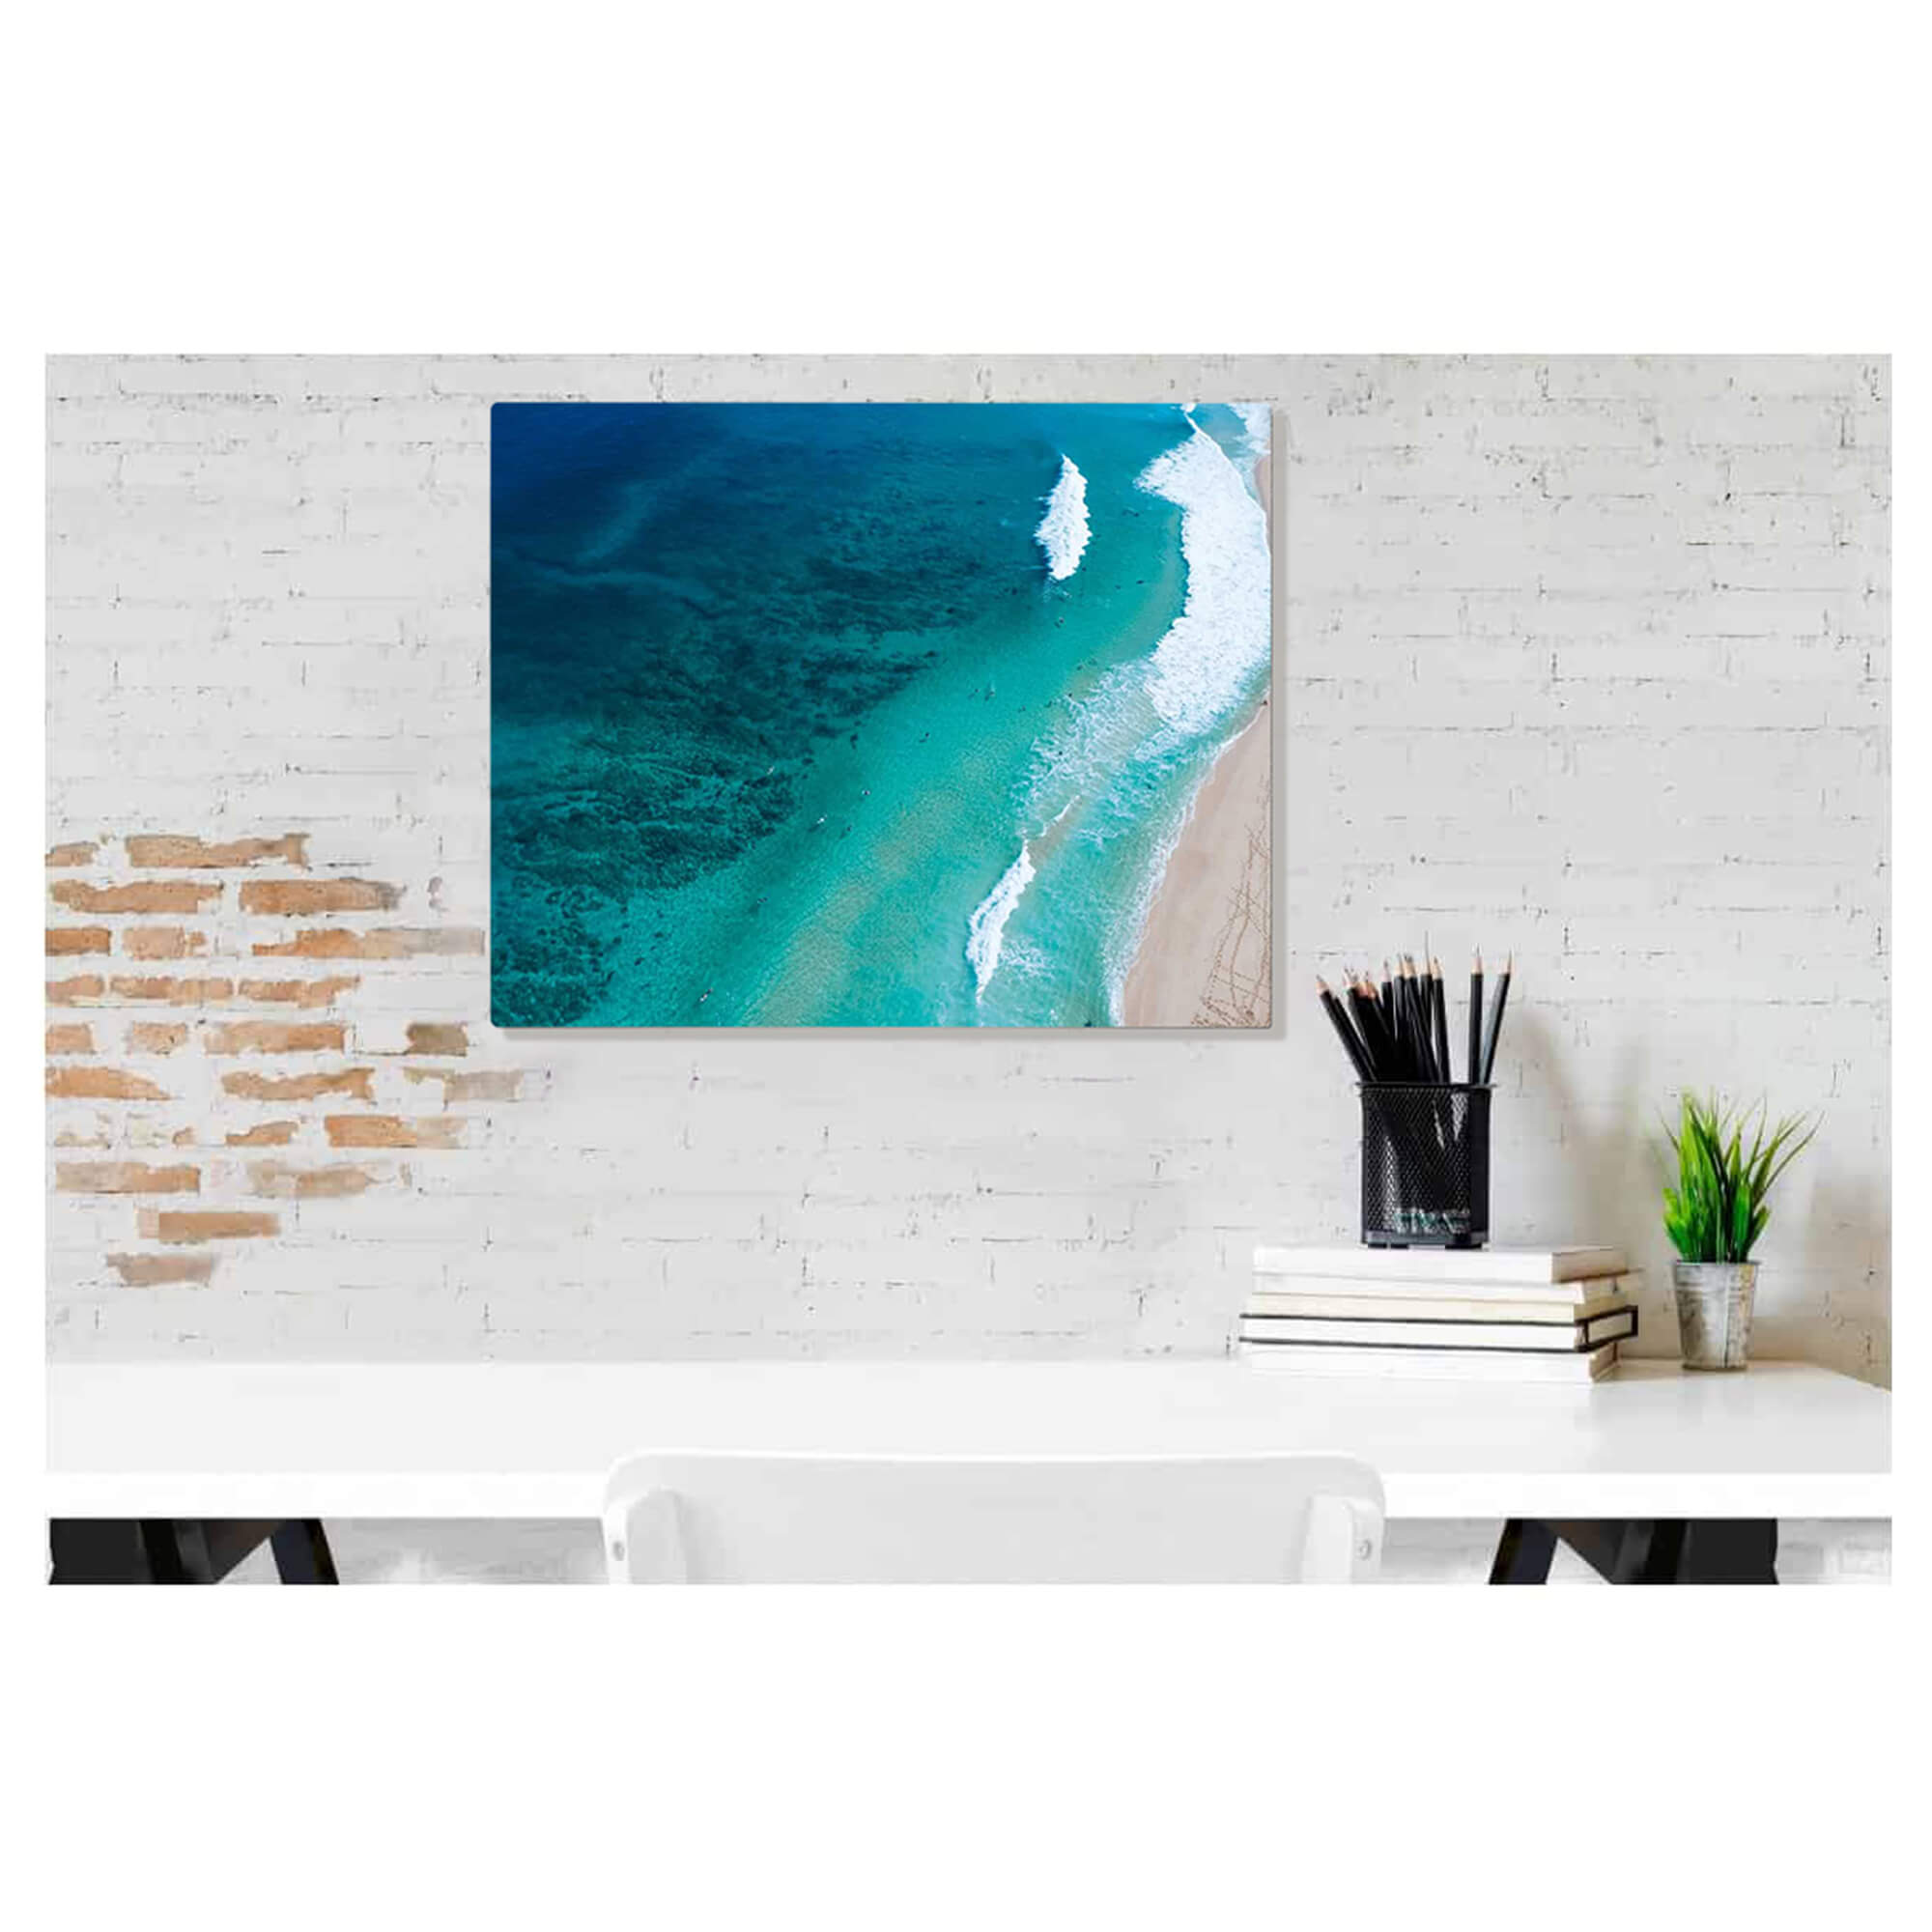 A metal art print of a dramatic aerial seascape print depicts a drone photo of famous waves and surfers near Pupukea by Hawaii artist Bree Poort